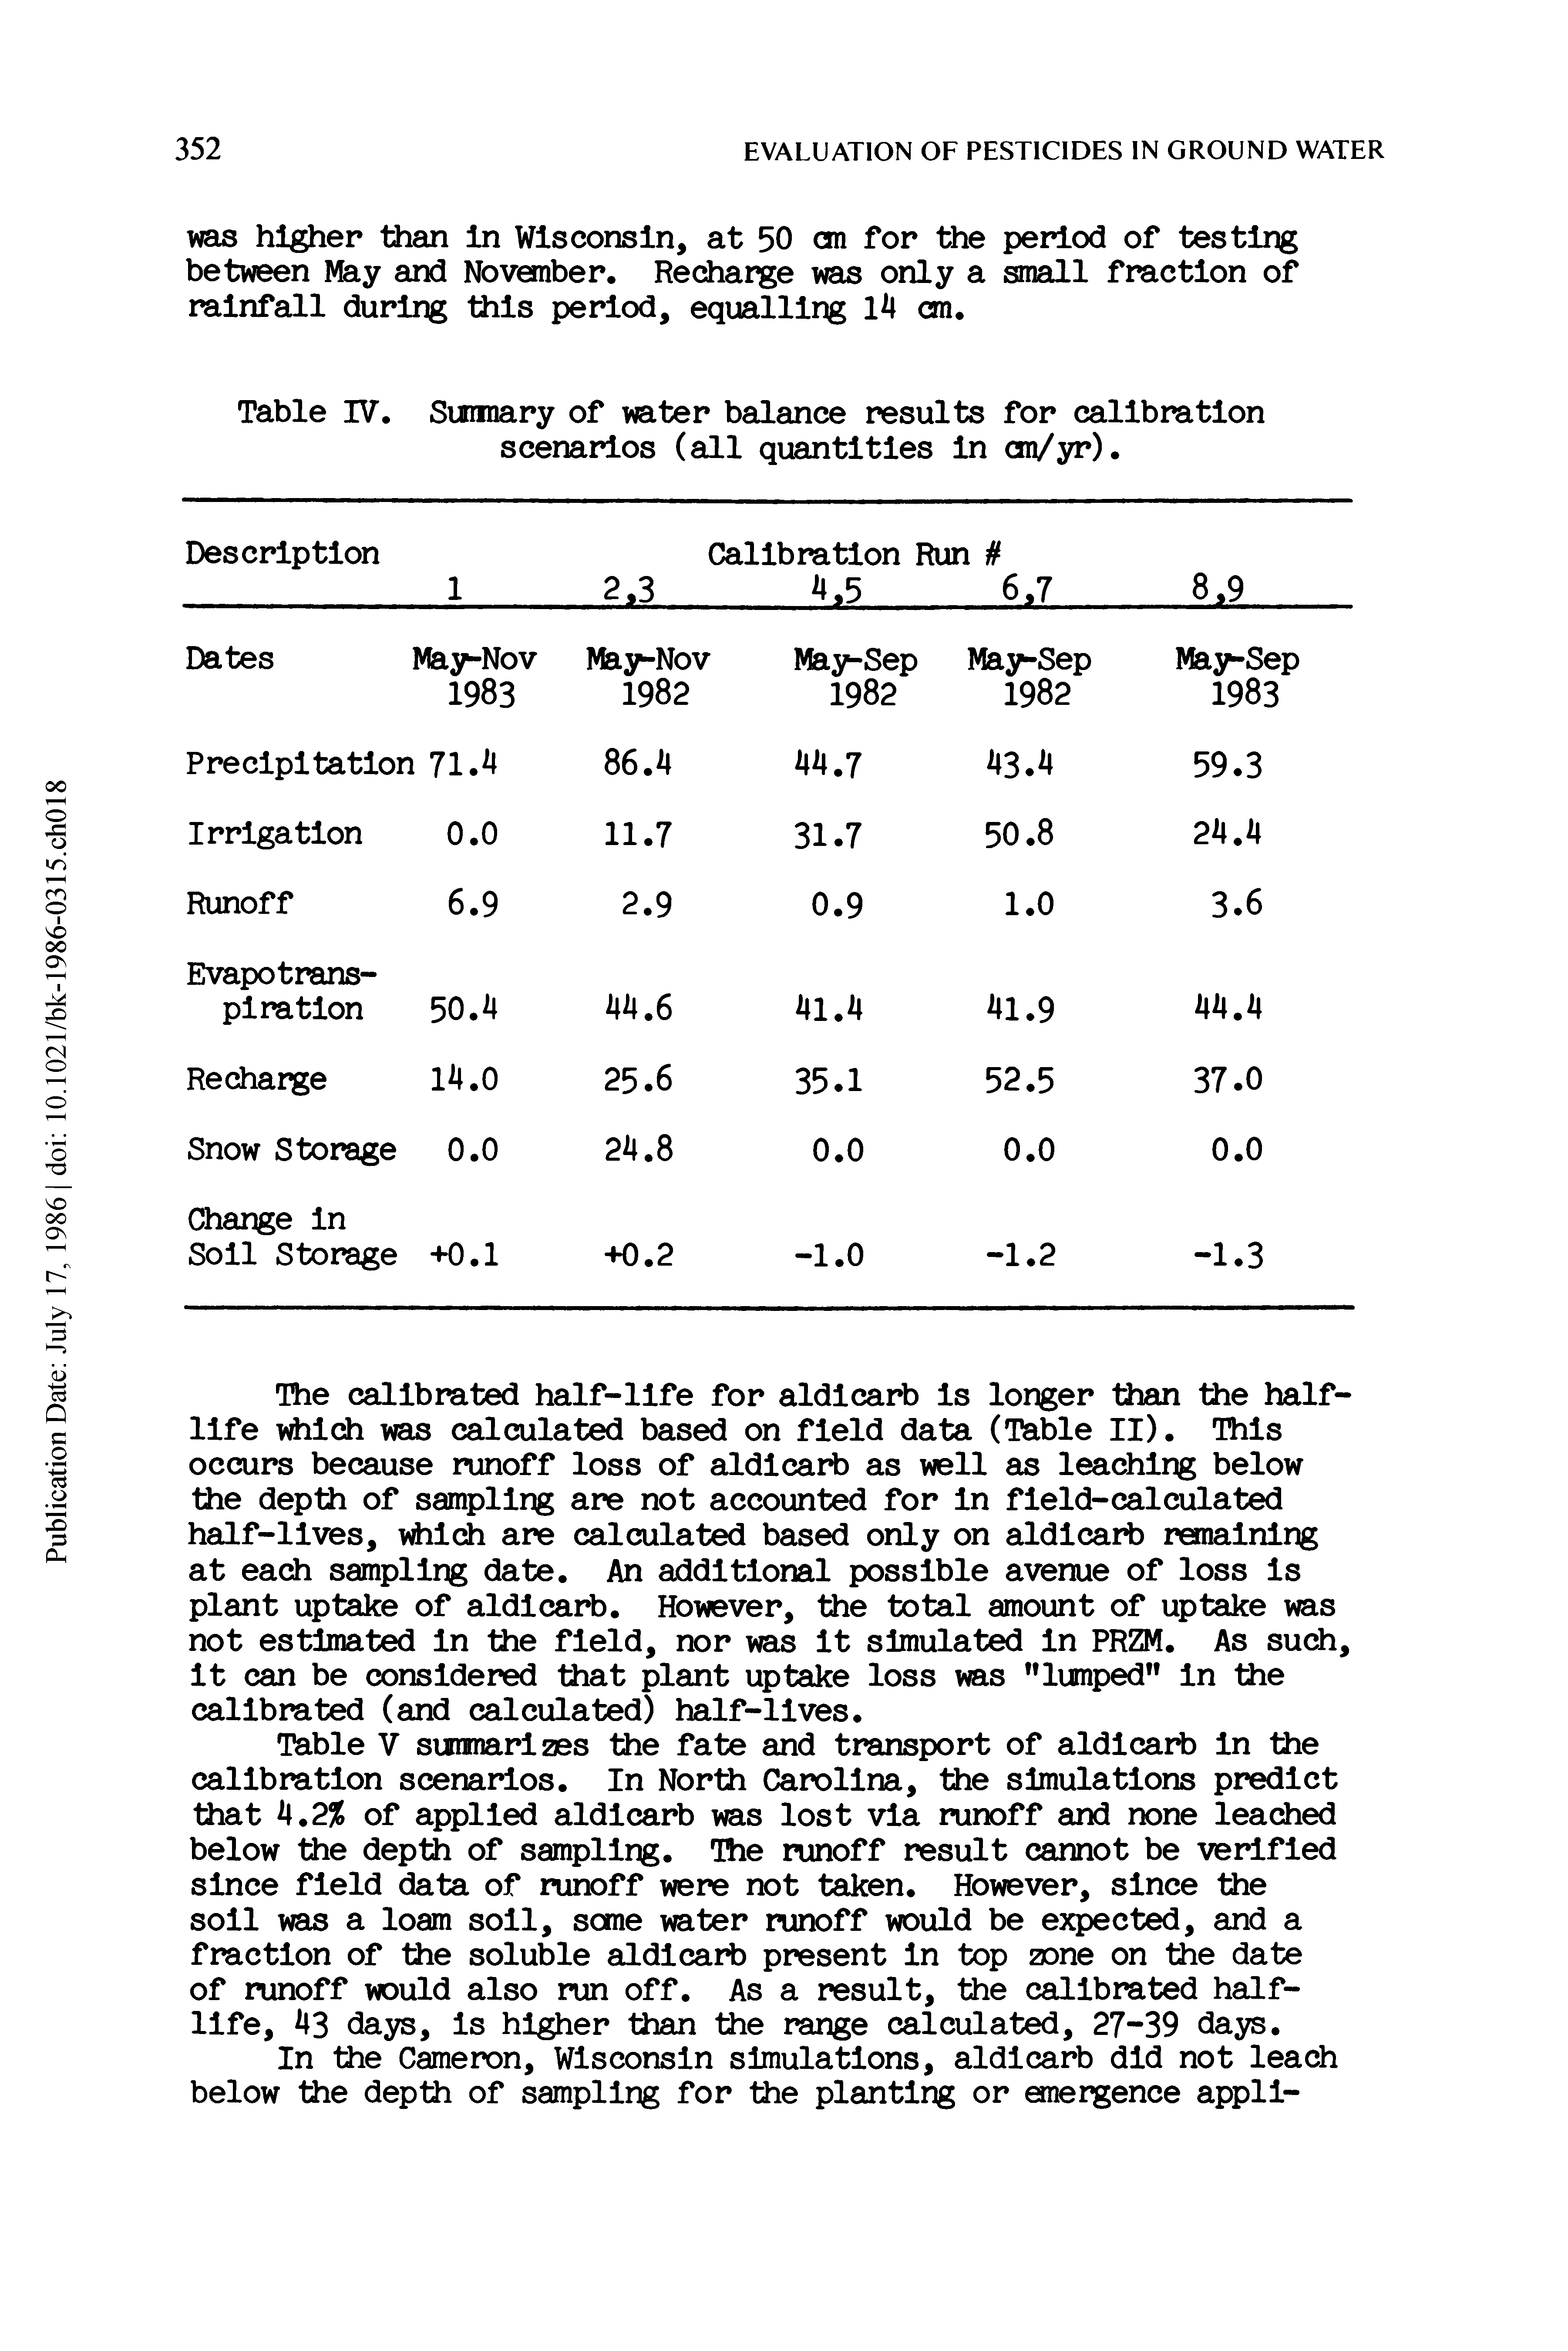 Table V summarizes the fate and transport of aldicarb in the calibration scenarios. In North Carolina, the simulations predict that 4.2% of applied aldicarb was lost via runoff and none leached below the depth of sampling. The runoff result cannot be verified since field data of runoff were not taken. However, since the soil was a loam soil, seme water runoff would be expected, and a fraction of the soluble aldicarb present in top zone on the date of runoff would also run off. As a result, the calibrated half-life, 43 days, is higher than the range calculated, 27-39 days.